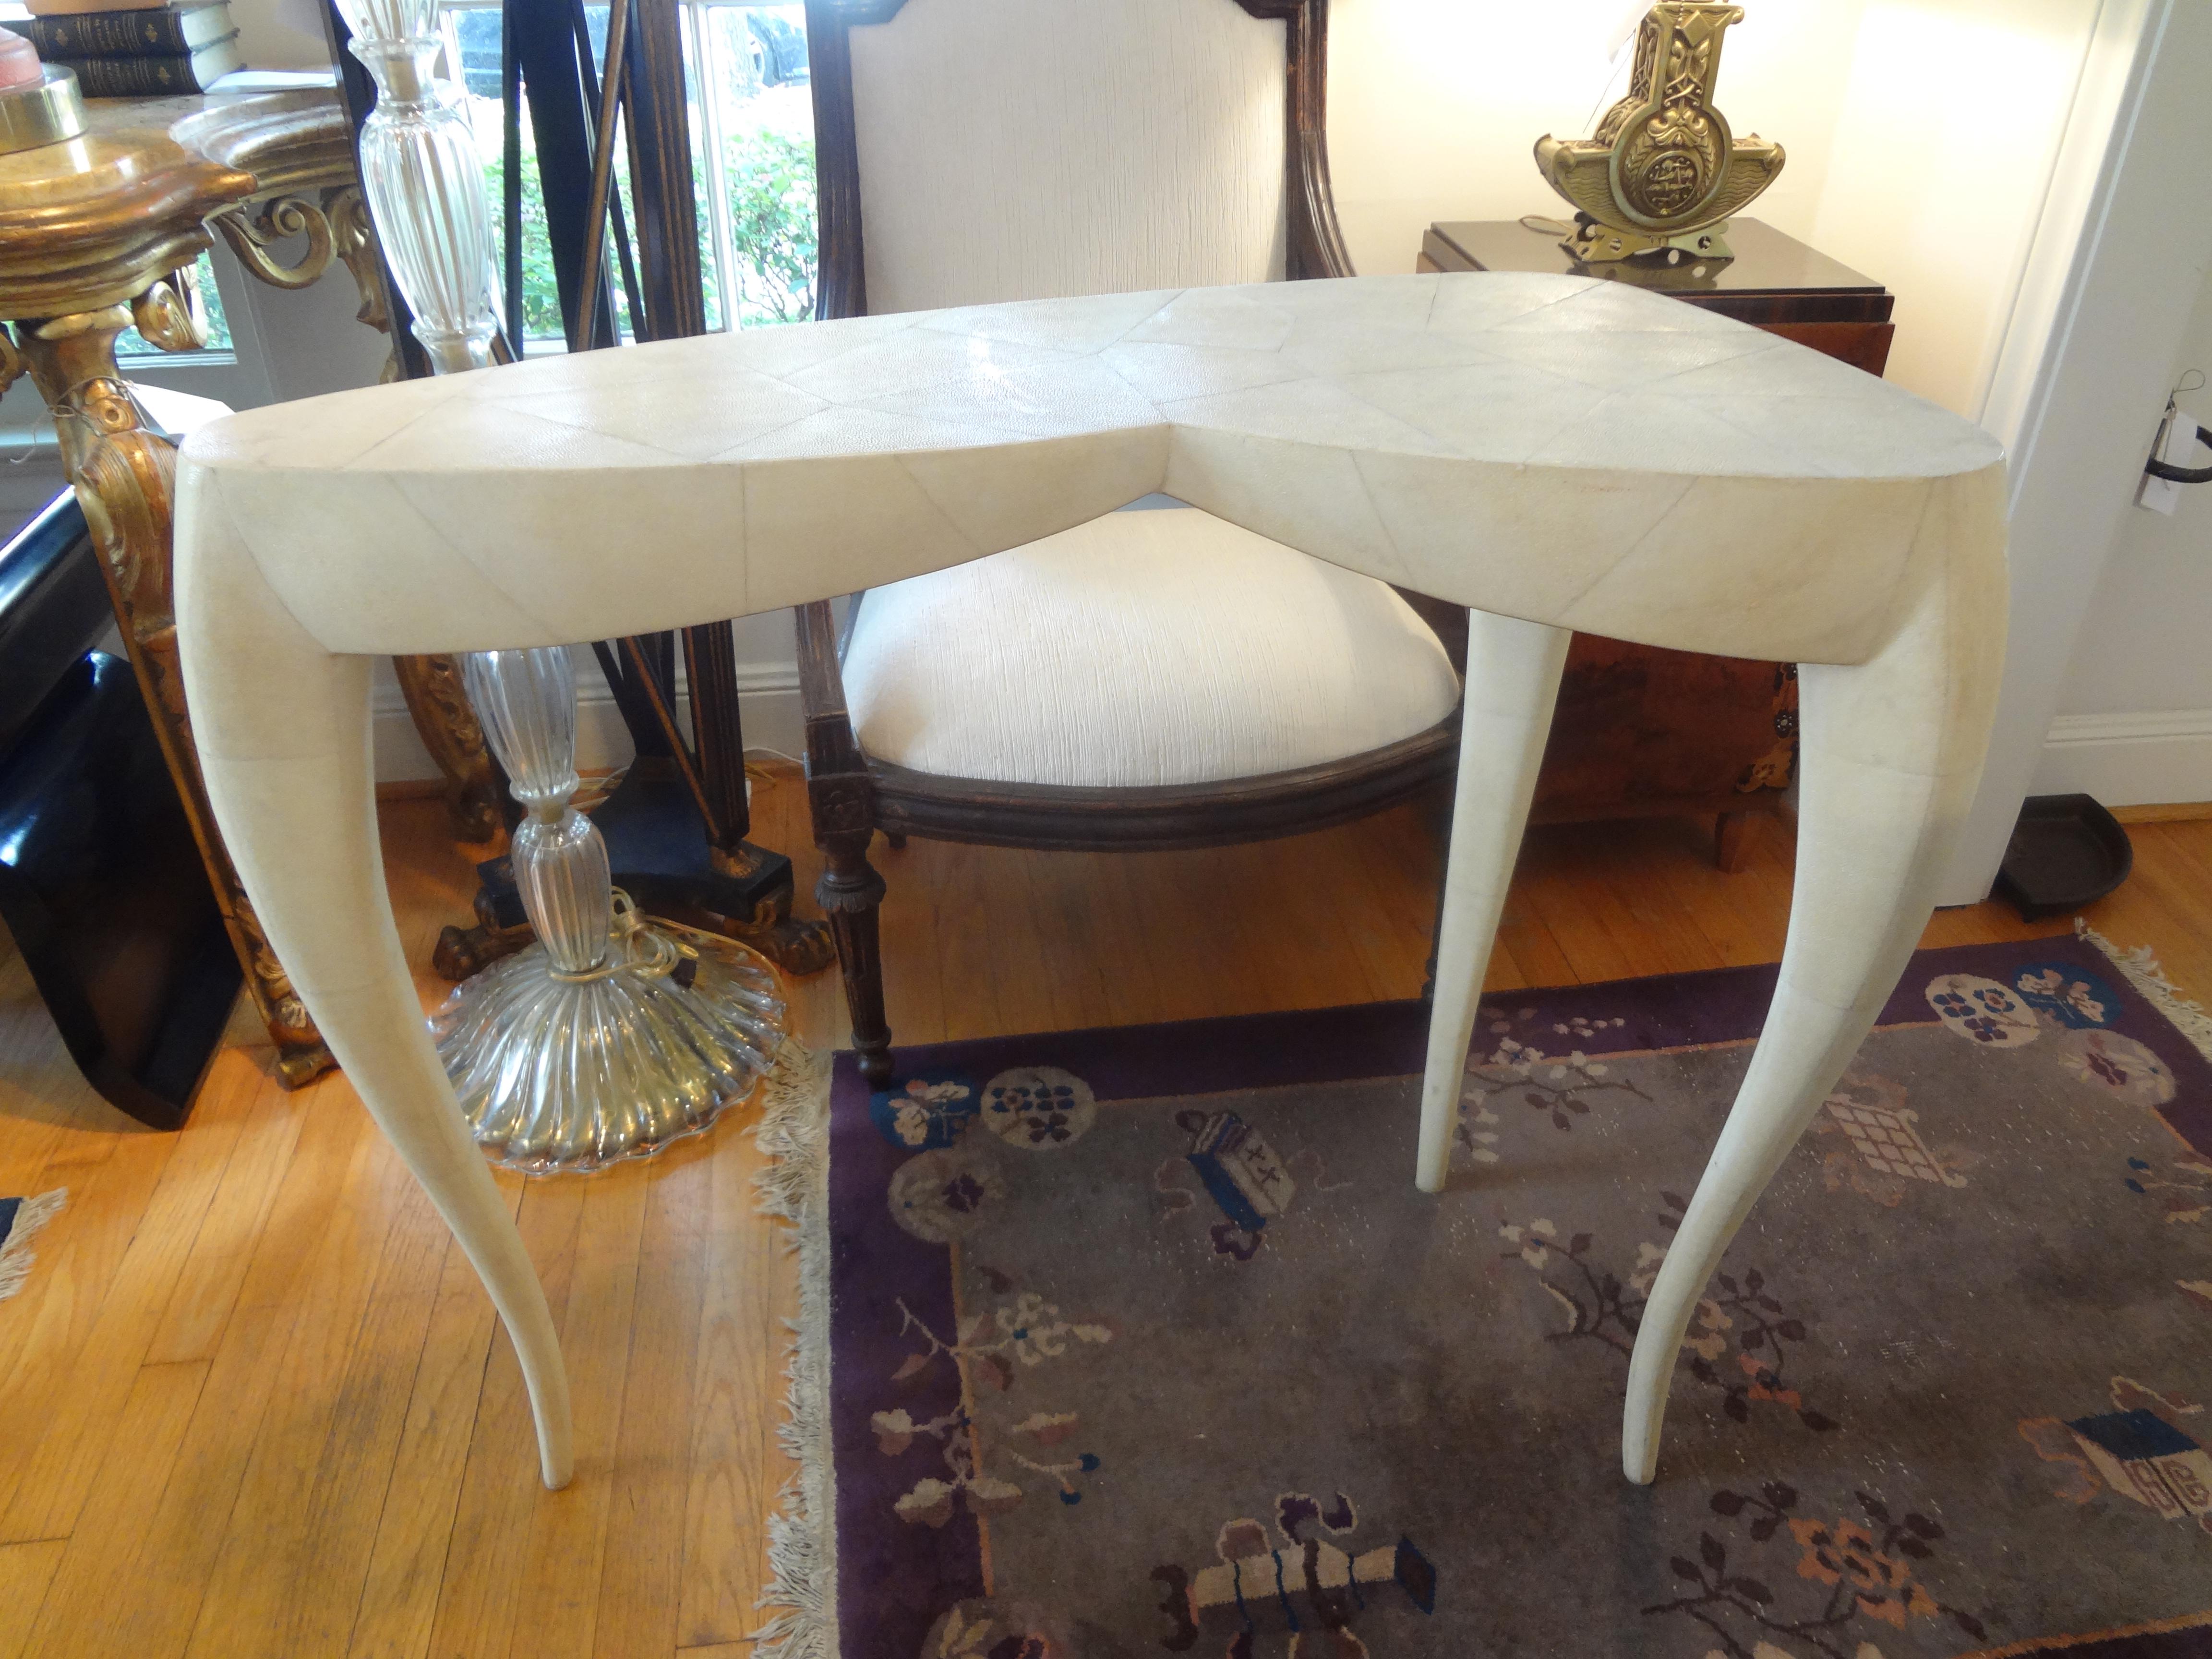 Organically shaped French modern shagreen console table by R&Y Augousti, Paris. This stunning and rare free standing console is made of wood covered in shagreen. The top is has an interesting patchwork pattern.